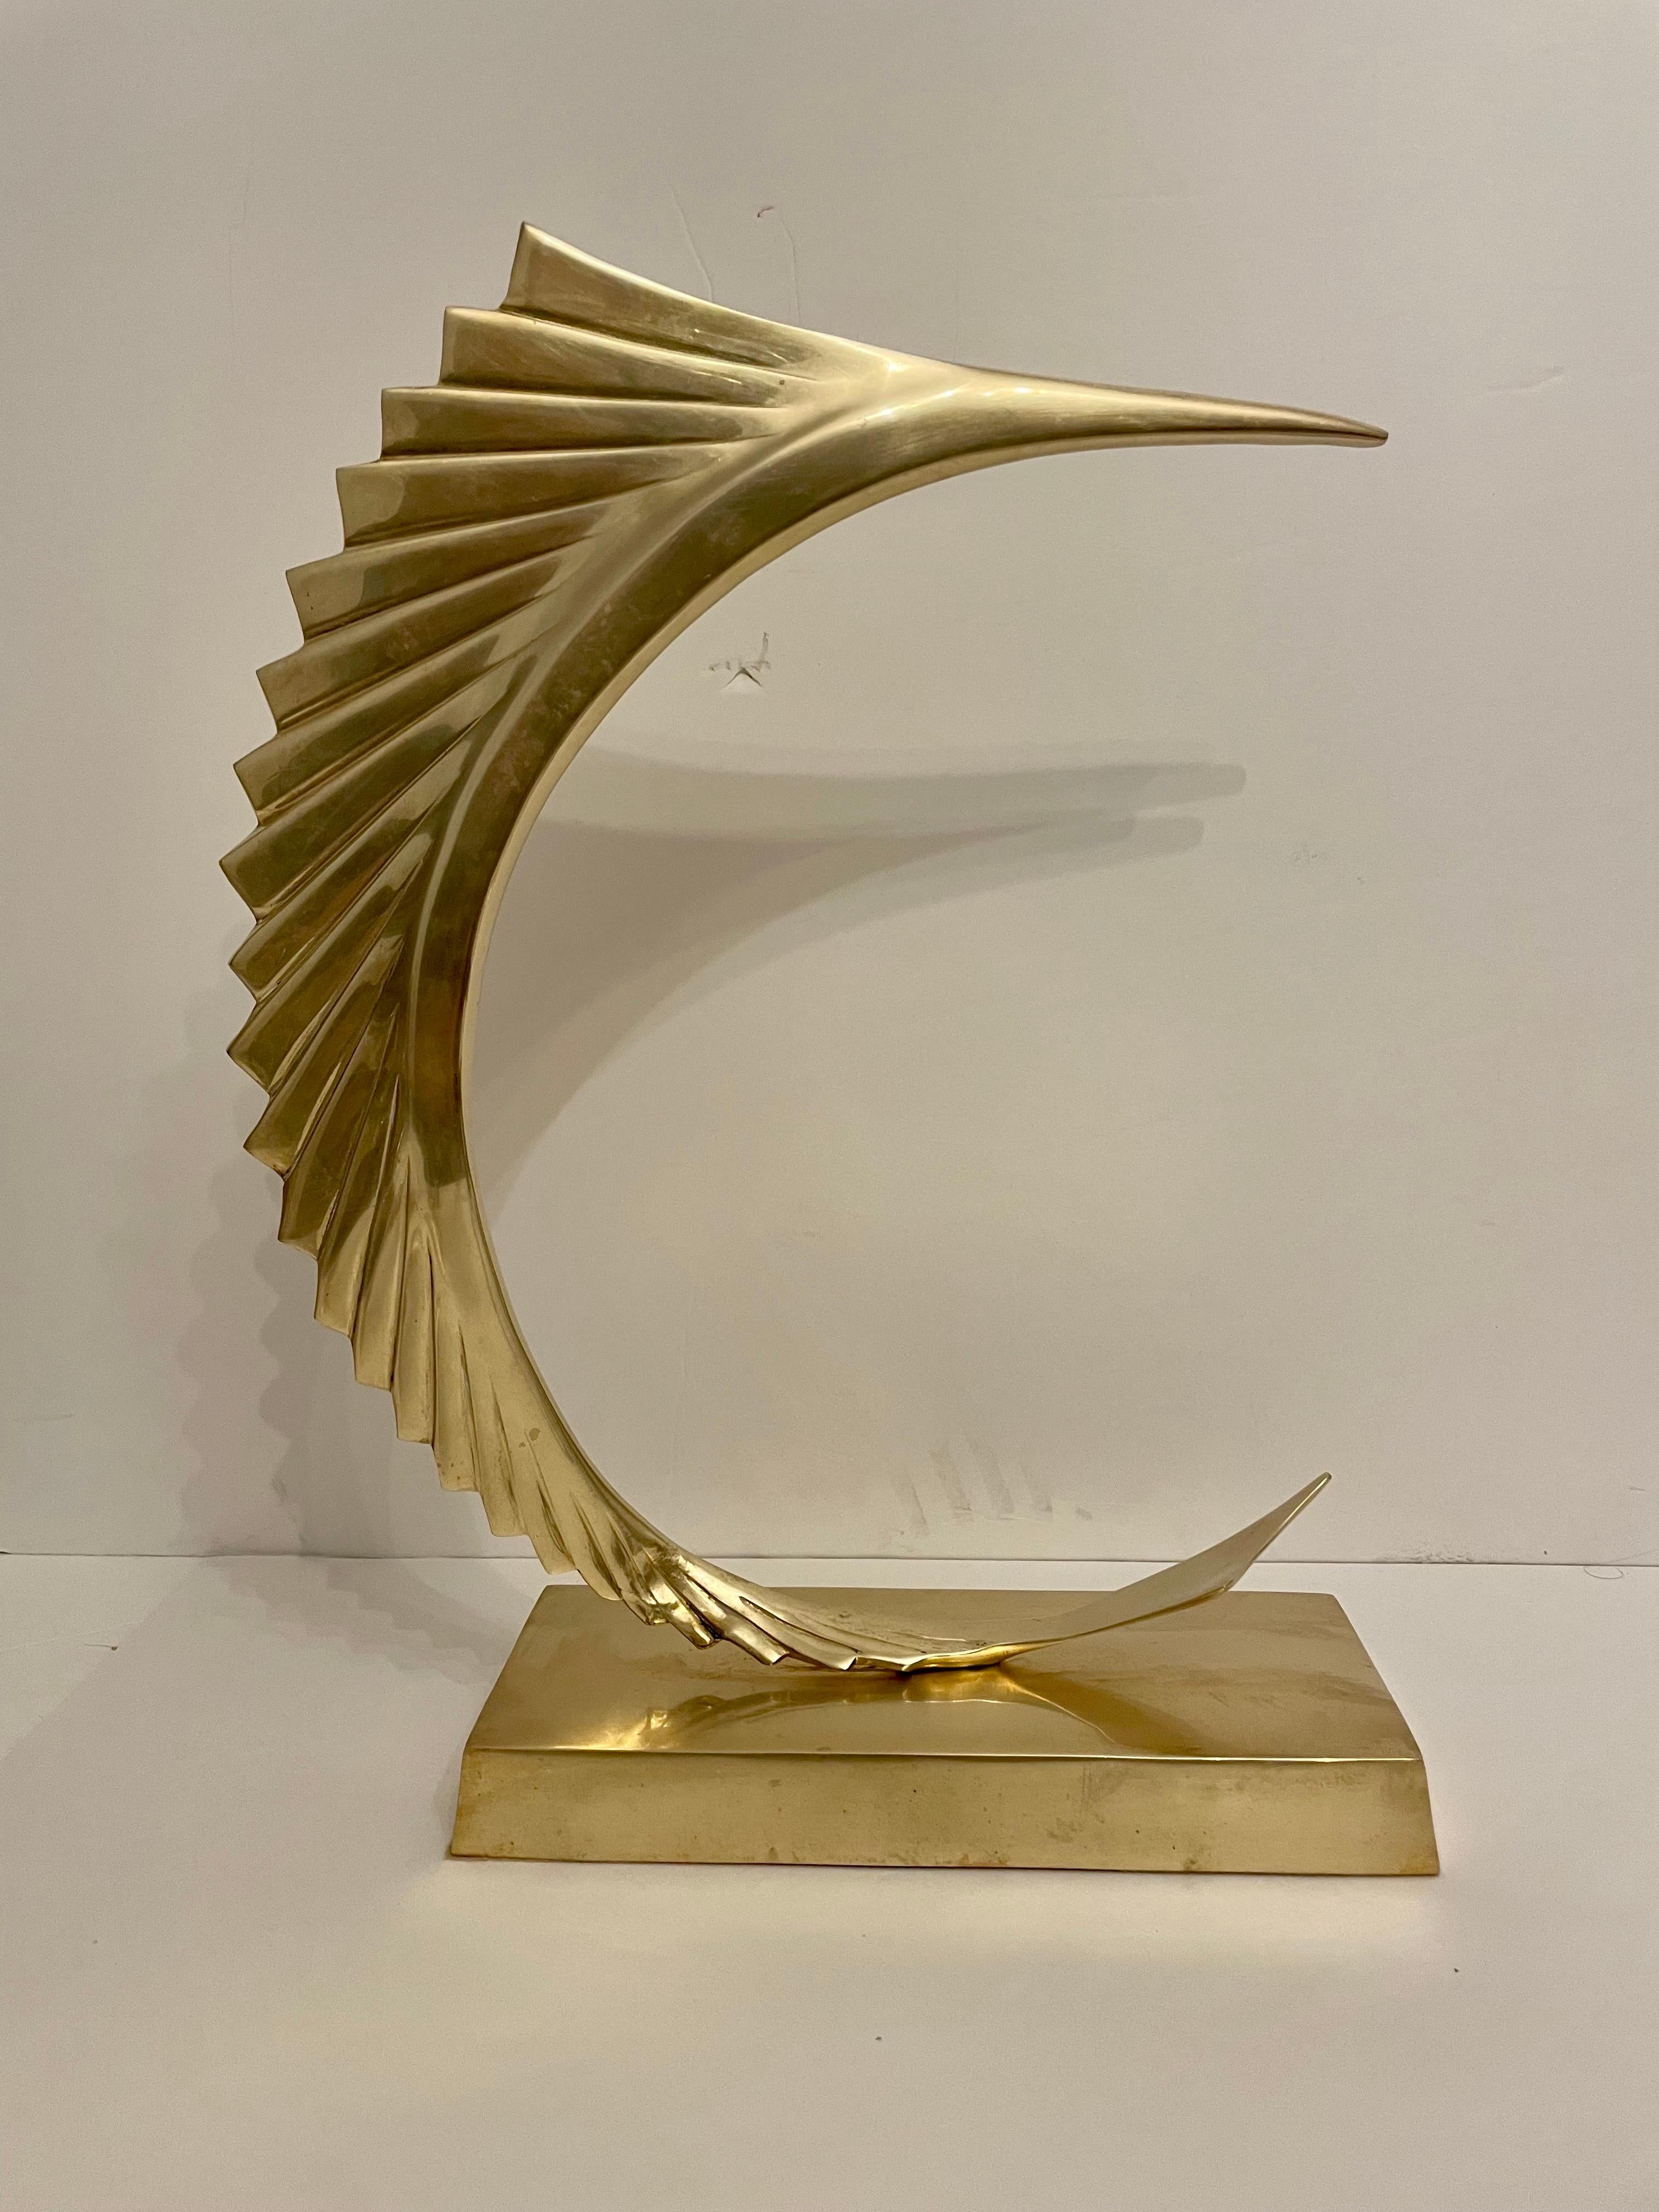 Mid century Brass Marlin or Sailfish sculpture from the 1950's-1960s. Good overall condition, hand polished. Measures 17